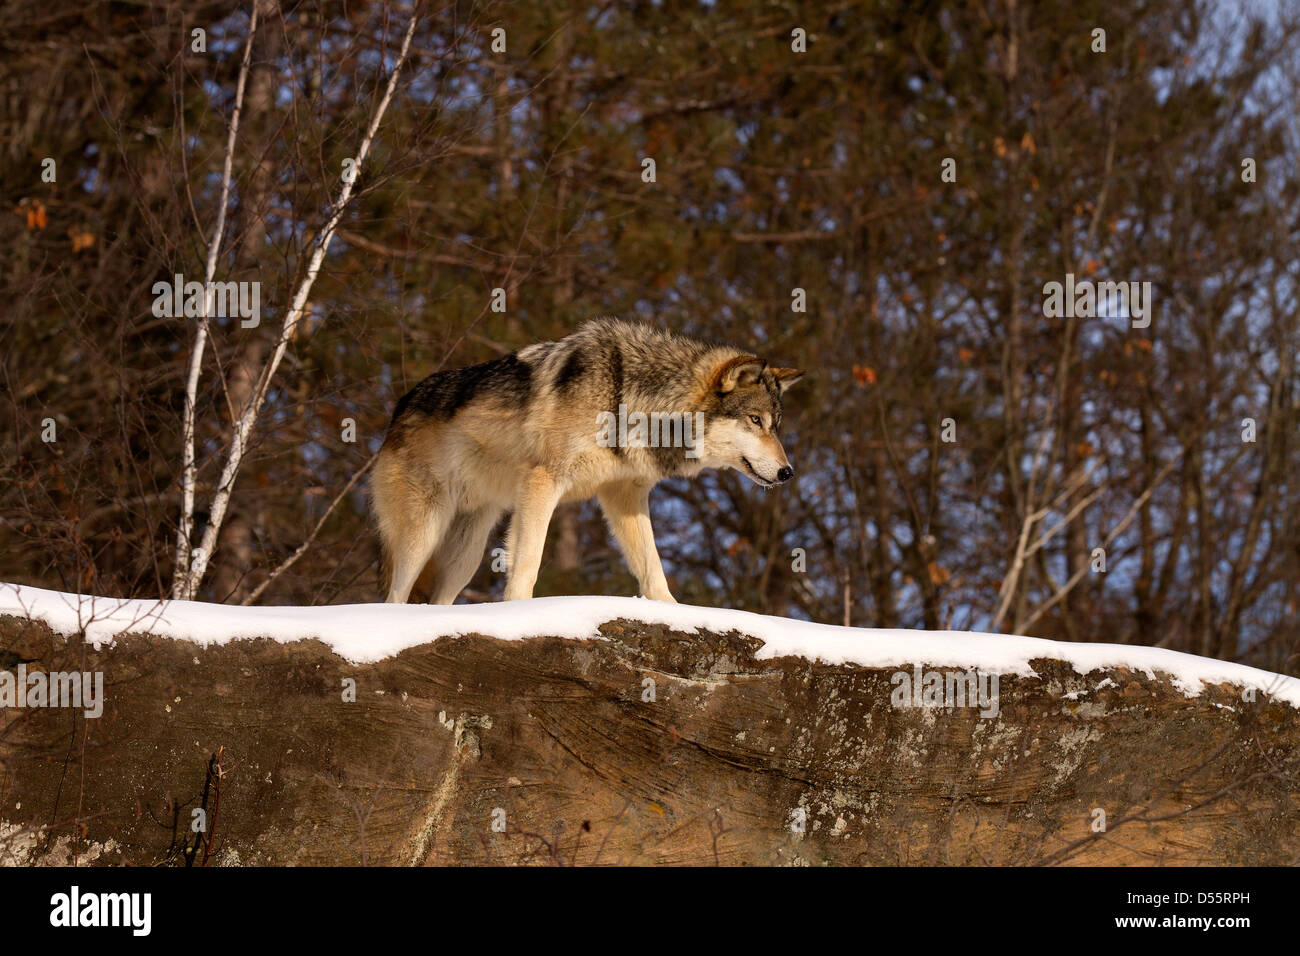 Gray Wolf, Canis lupus standing on rocky outcrop Stock Photo